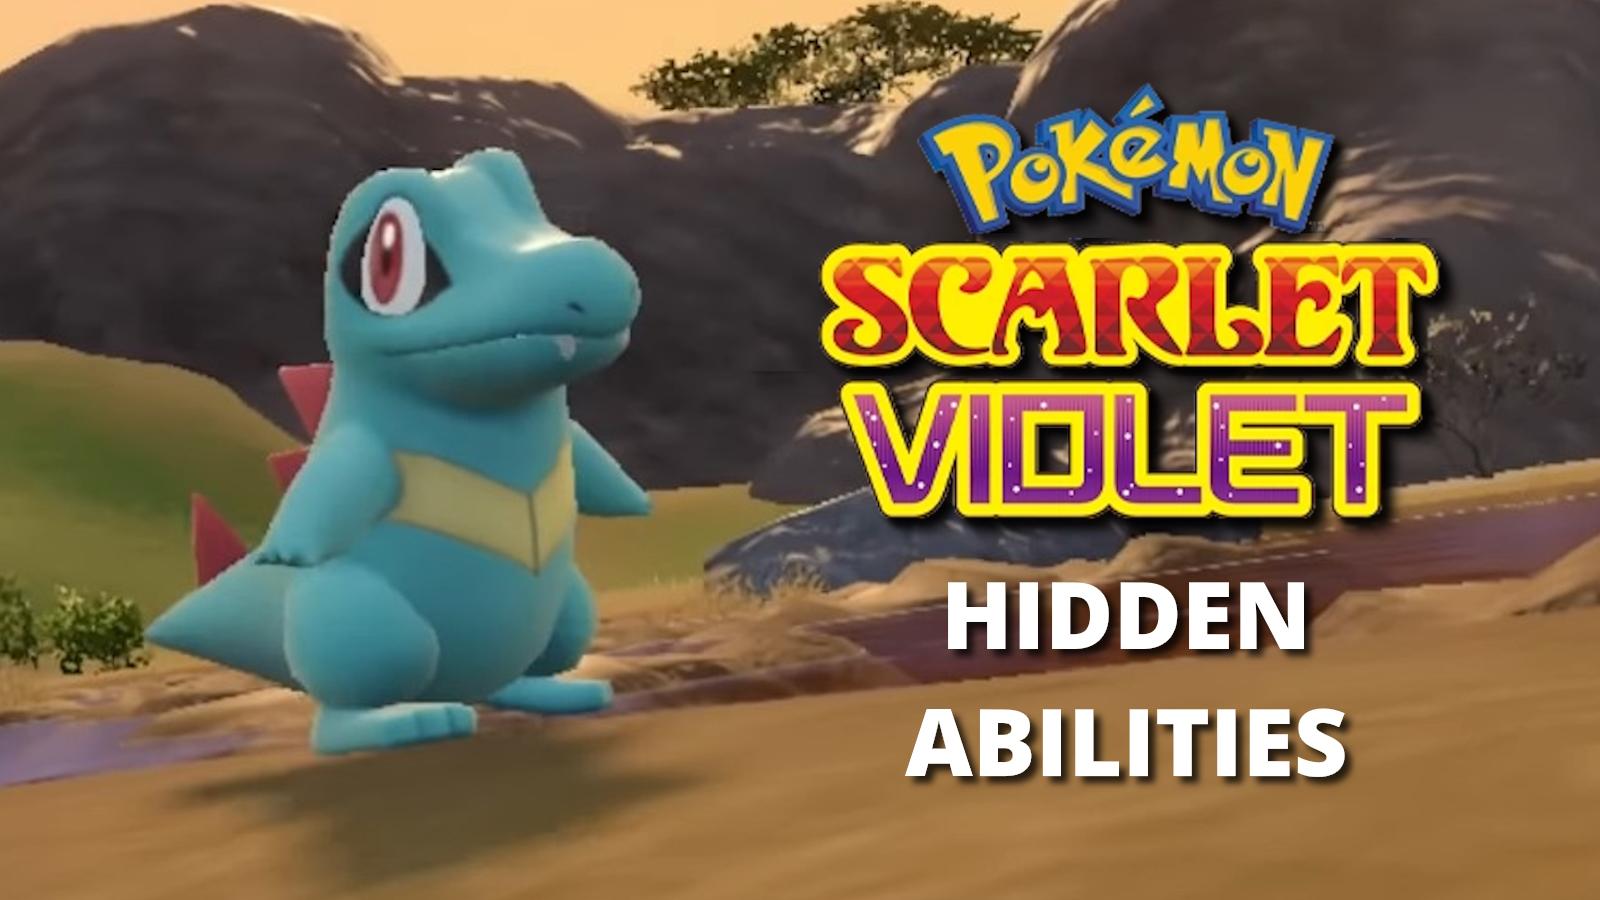 Totodile in Pokemon Scarlet and violet next to text that says 'Hidden Abilities'.